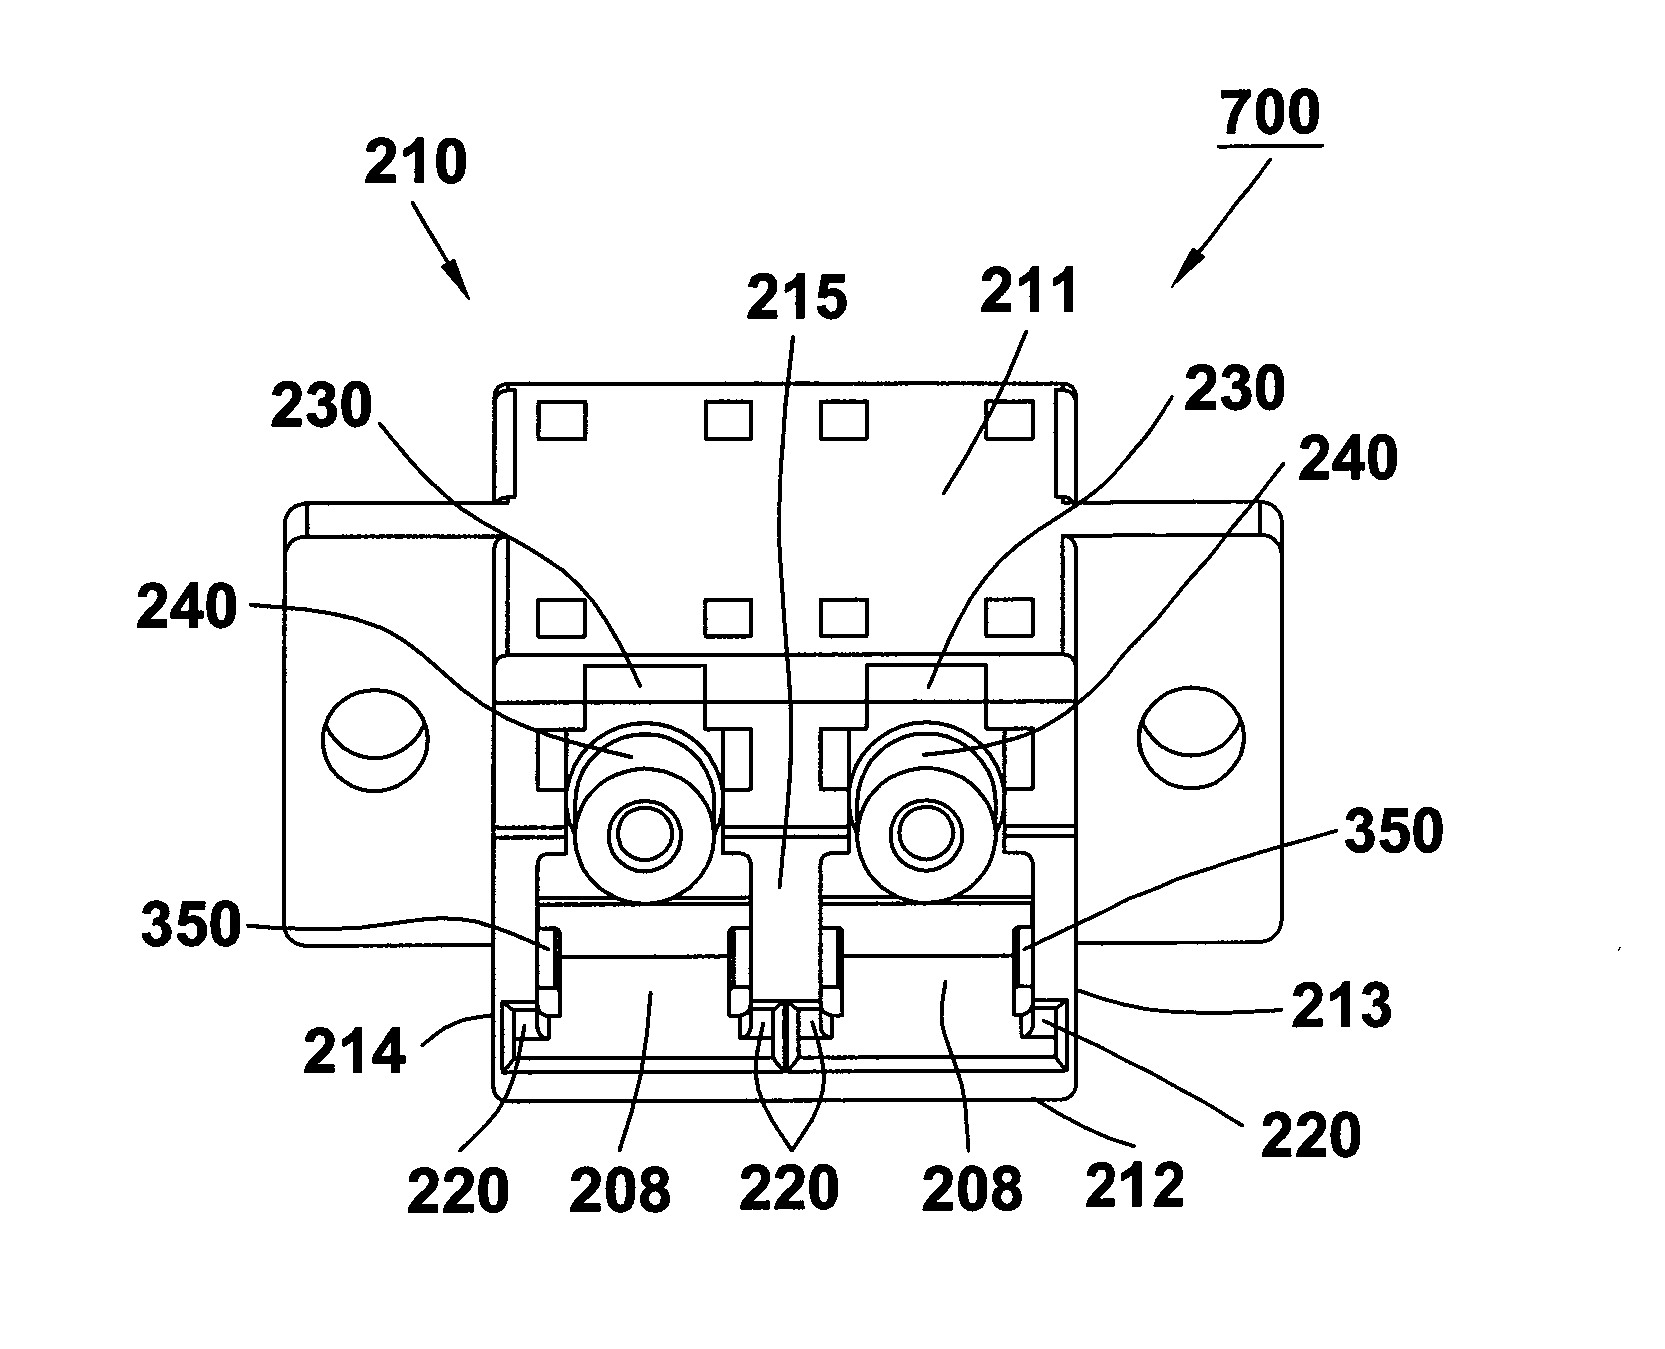 Optical fiber connector and adapter